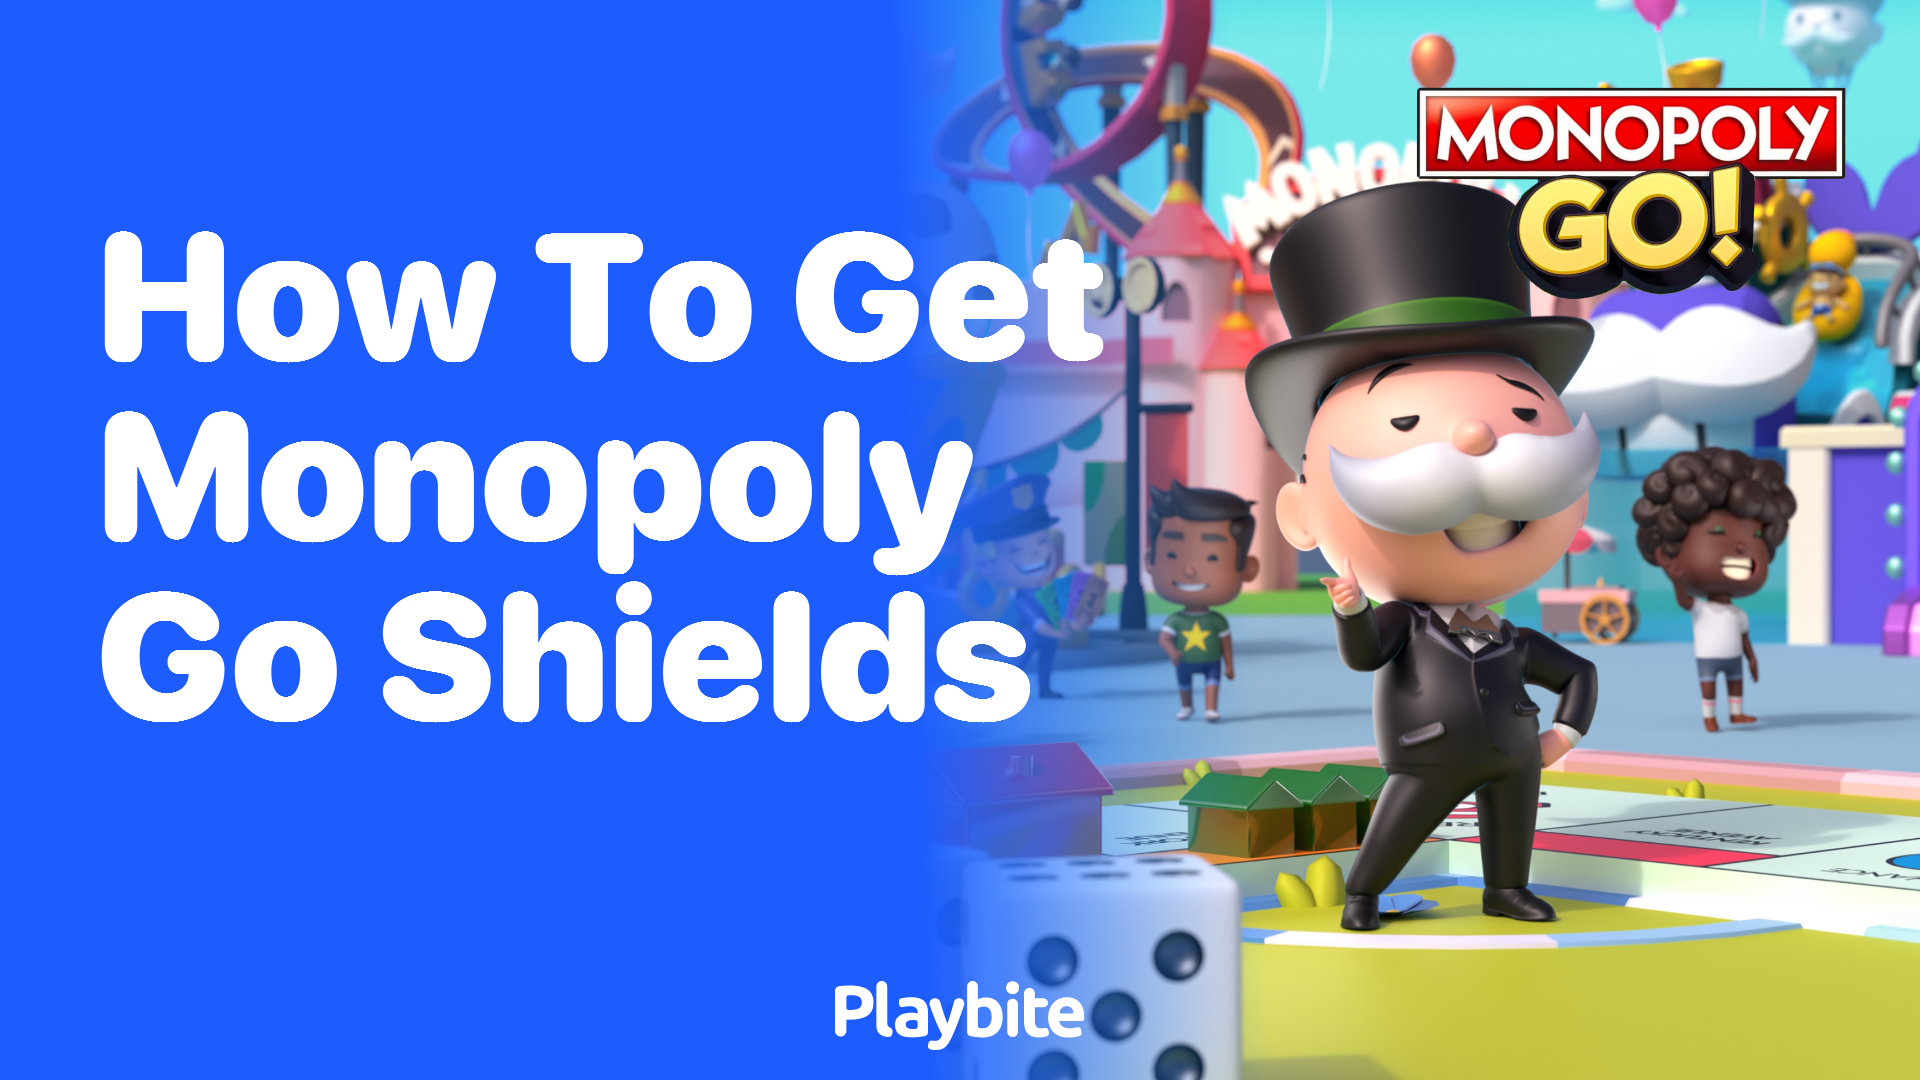 How to Get Monopoly Go Shields: A Simple Guide